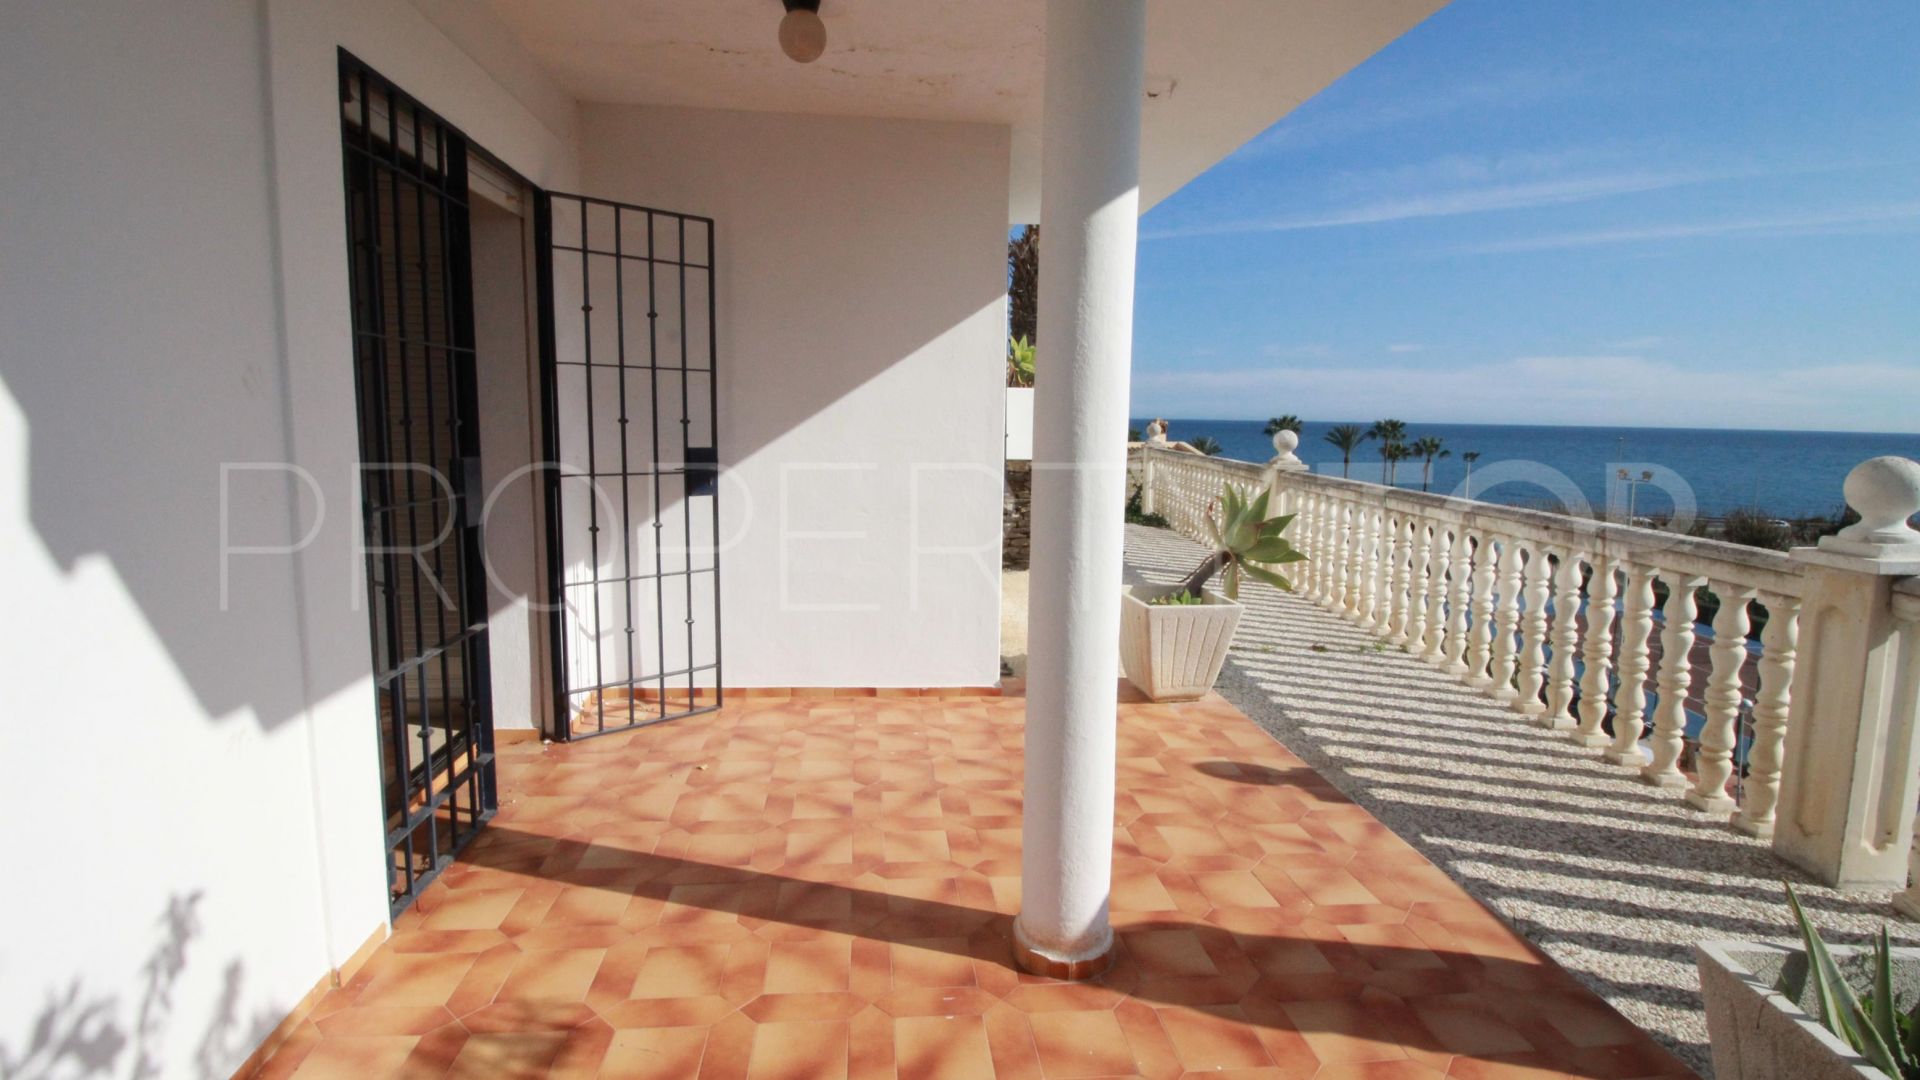 For sale house in Mijas Costa